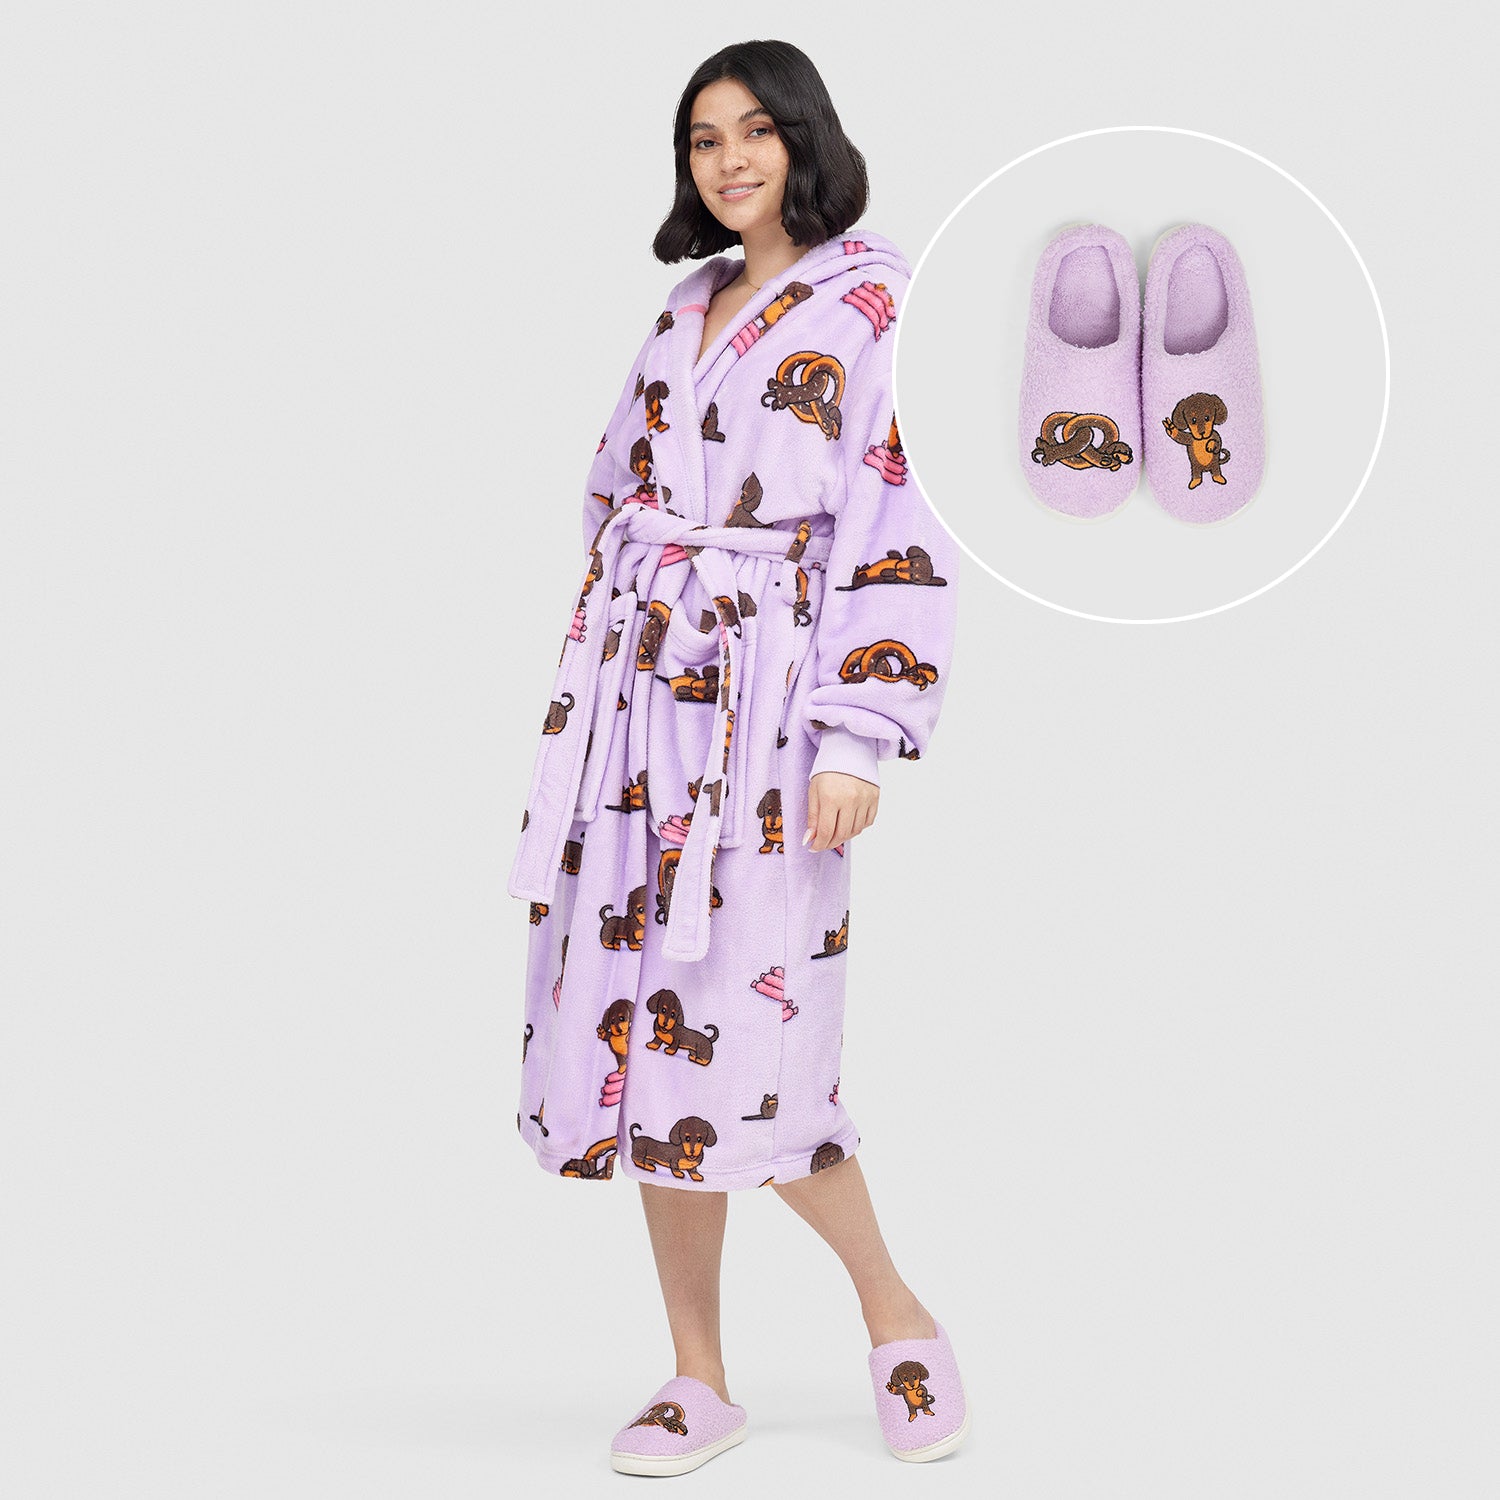 Luxury Bath Robes & Slippers | Sheridan Outlet